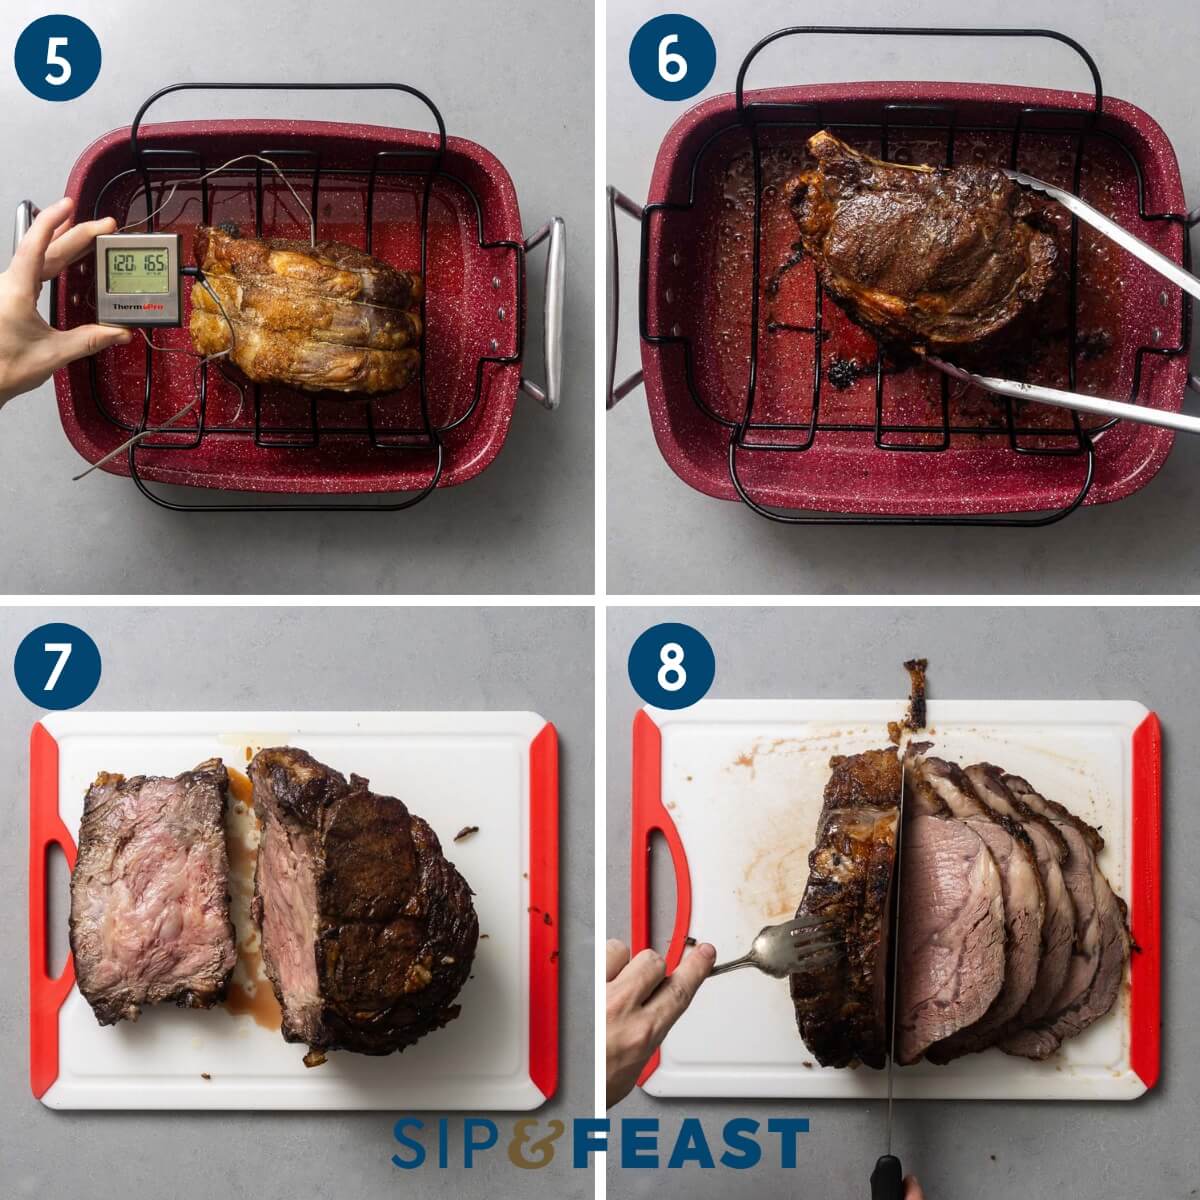 Recipe collage group two showing roasted prime rib at 120f, searing of roast with tongs, removing string, and slicing the roast.